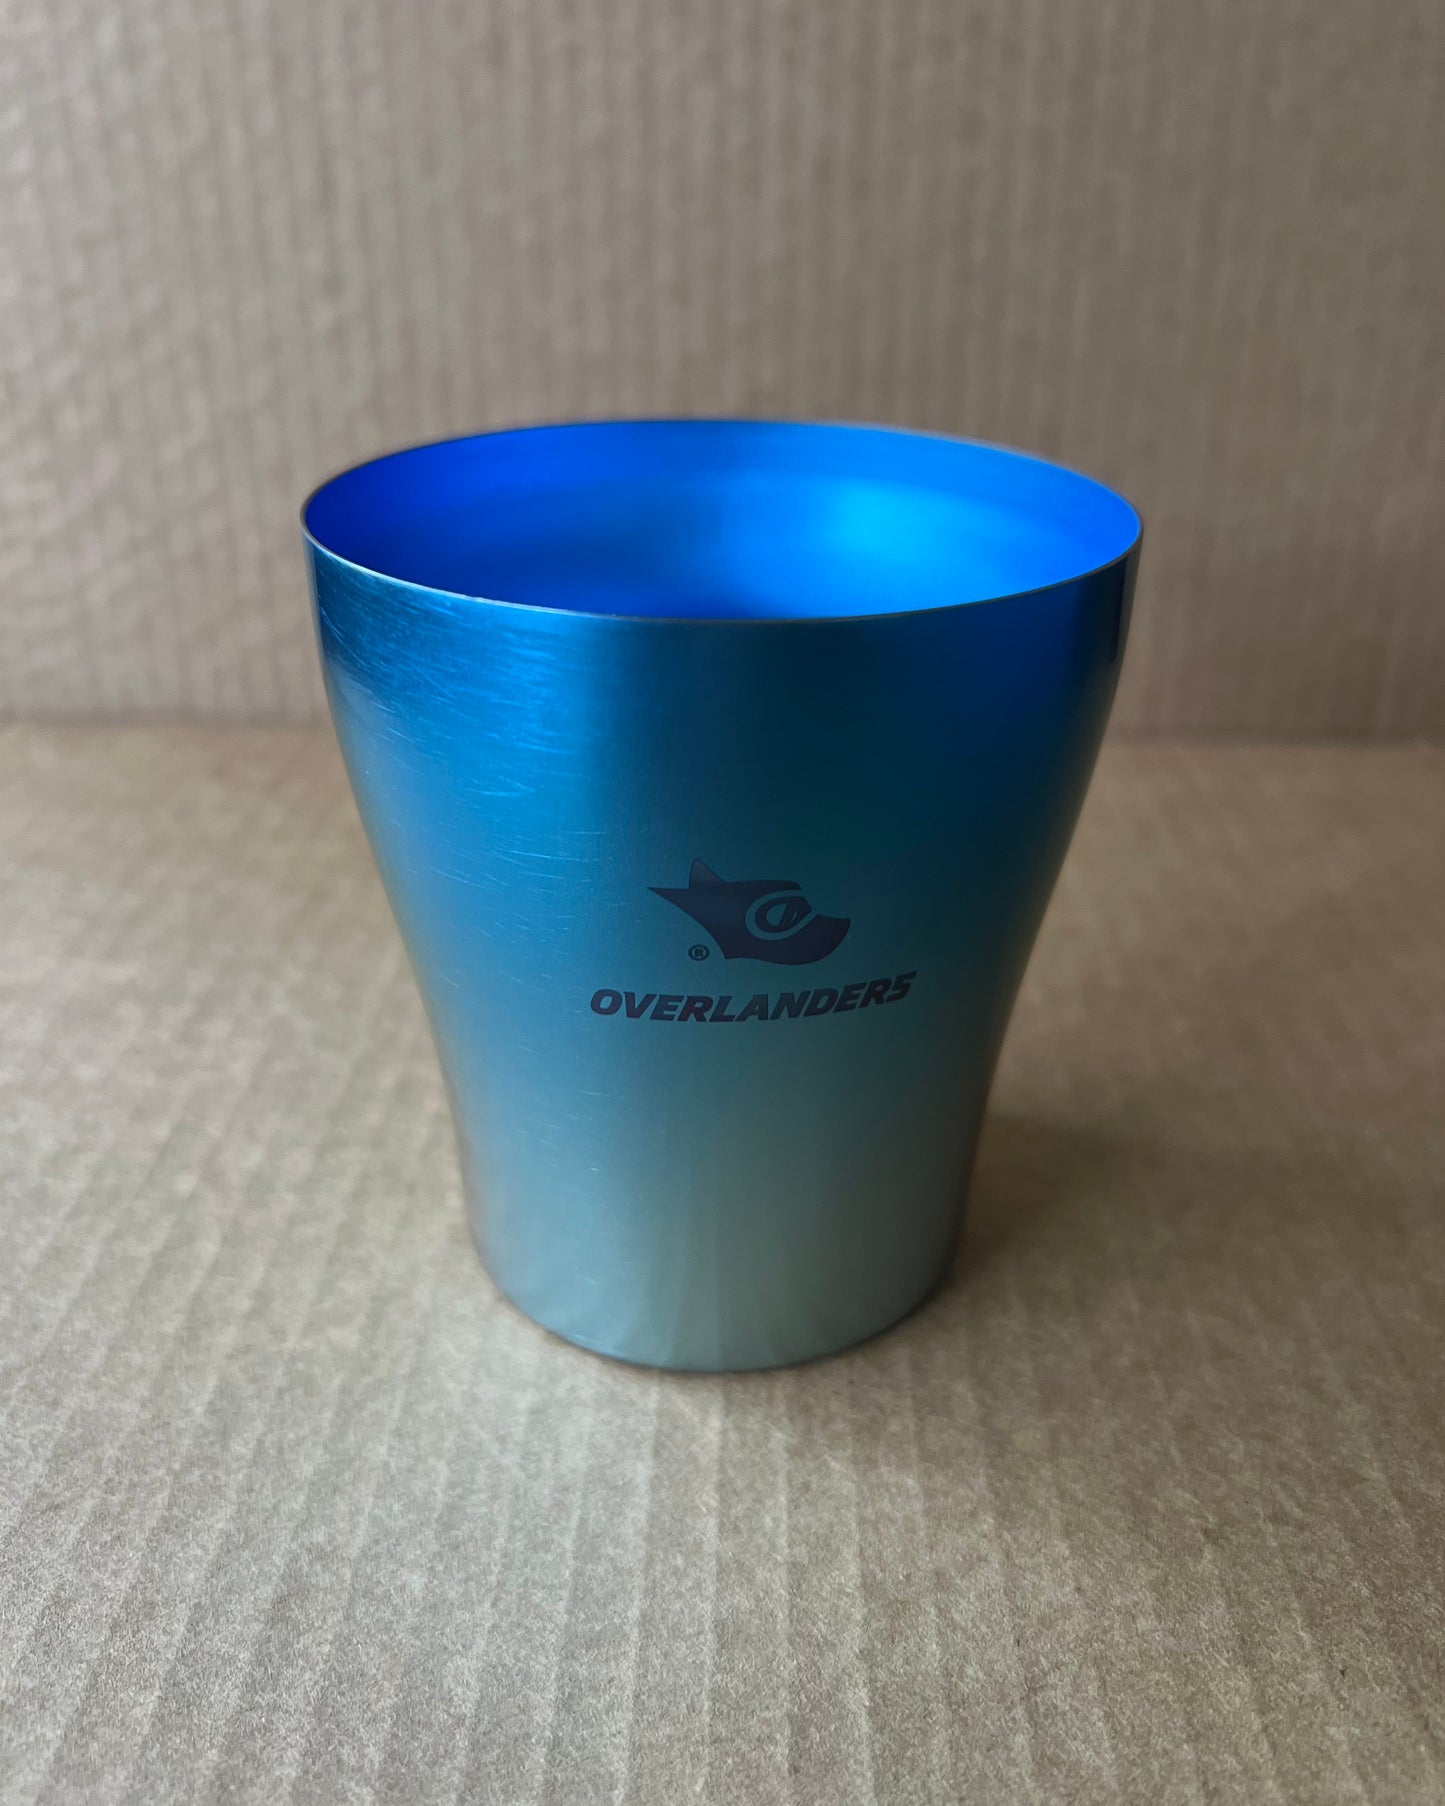 Overlanders Titanium Double-wall Cup, Blue, made in Japan